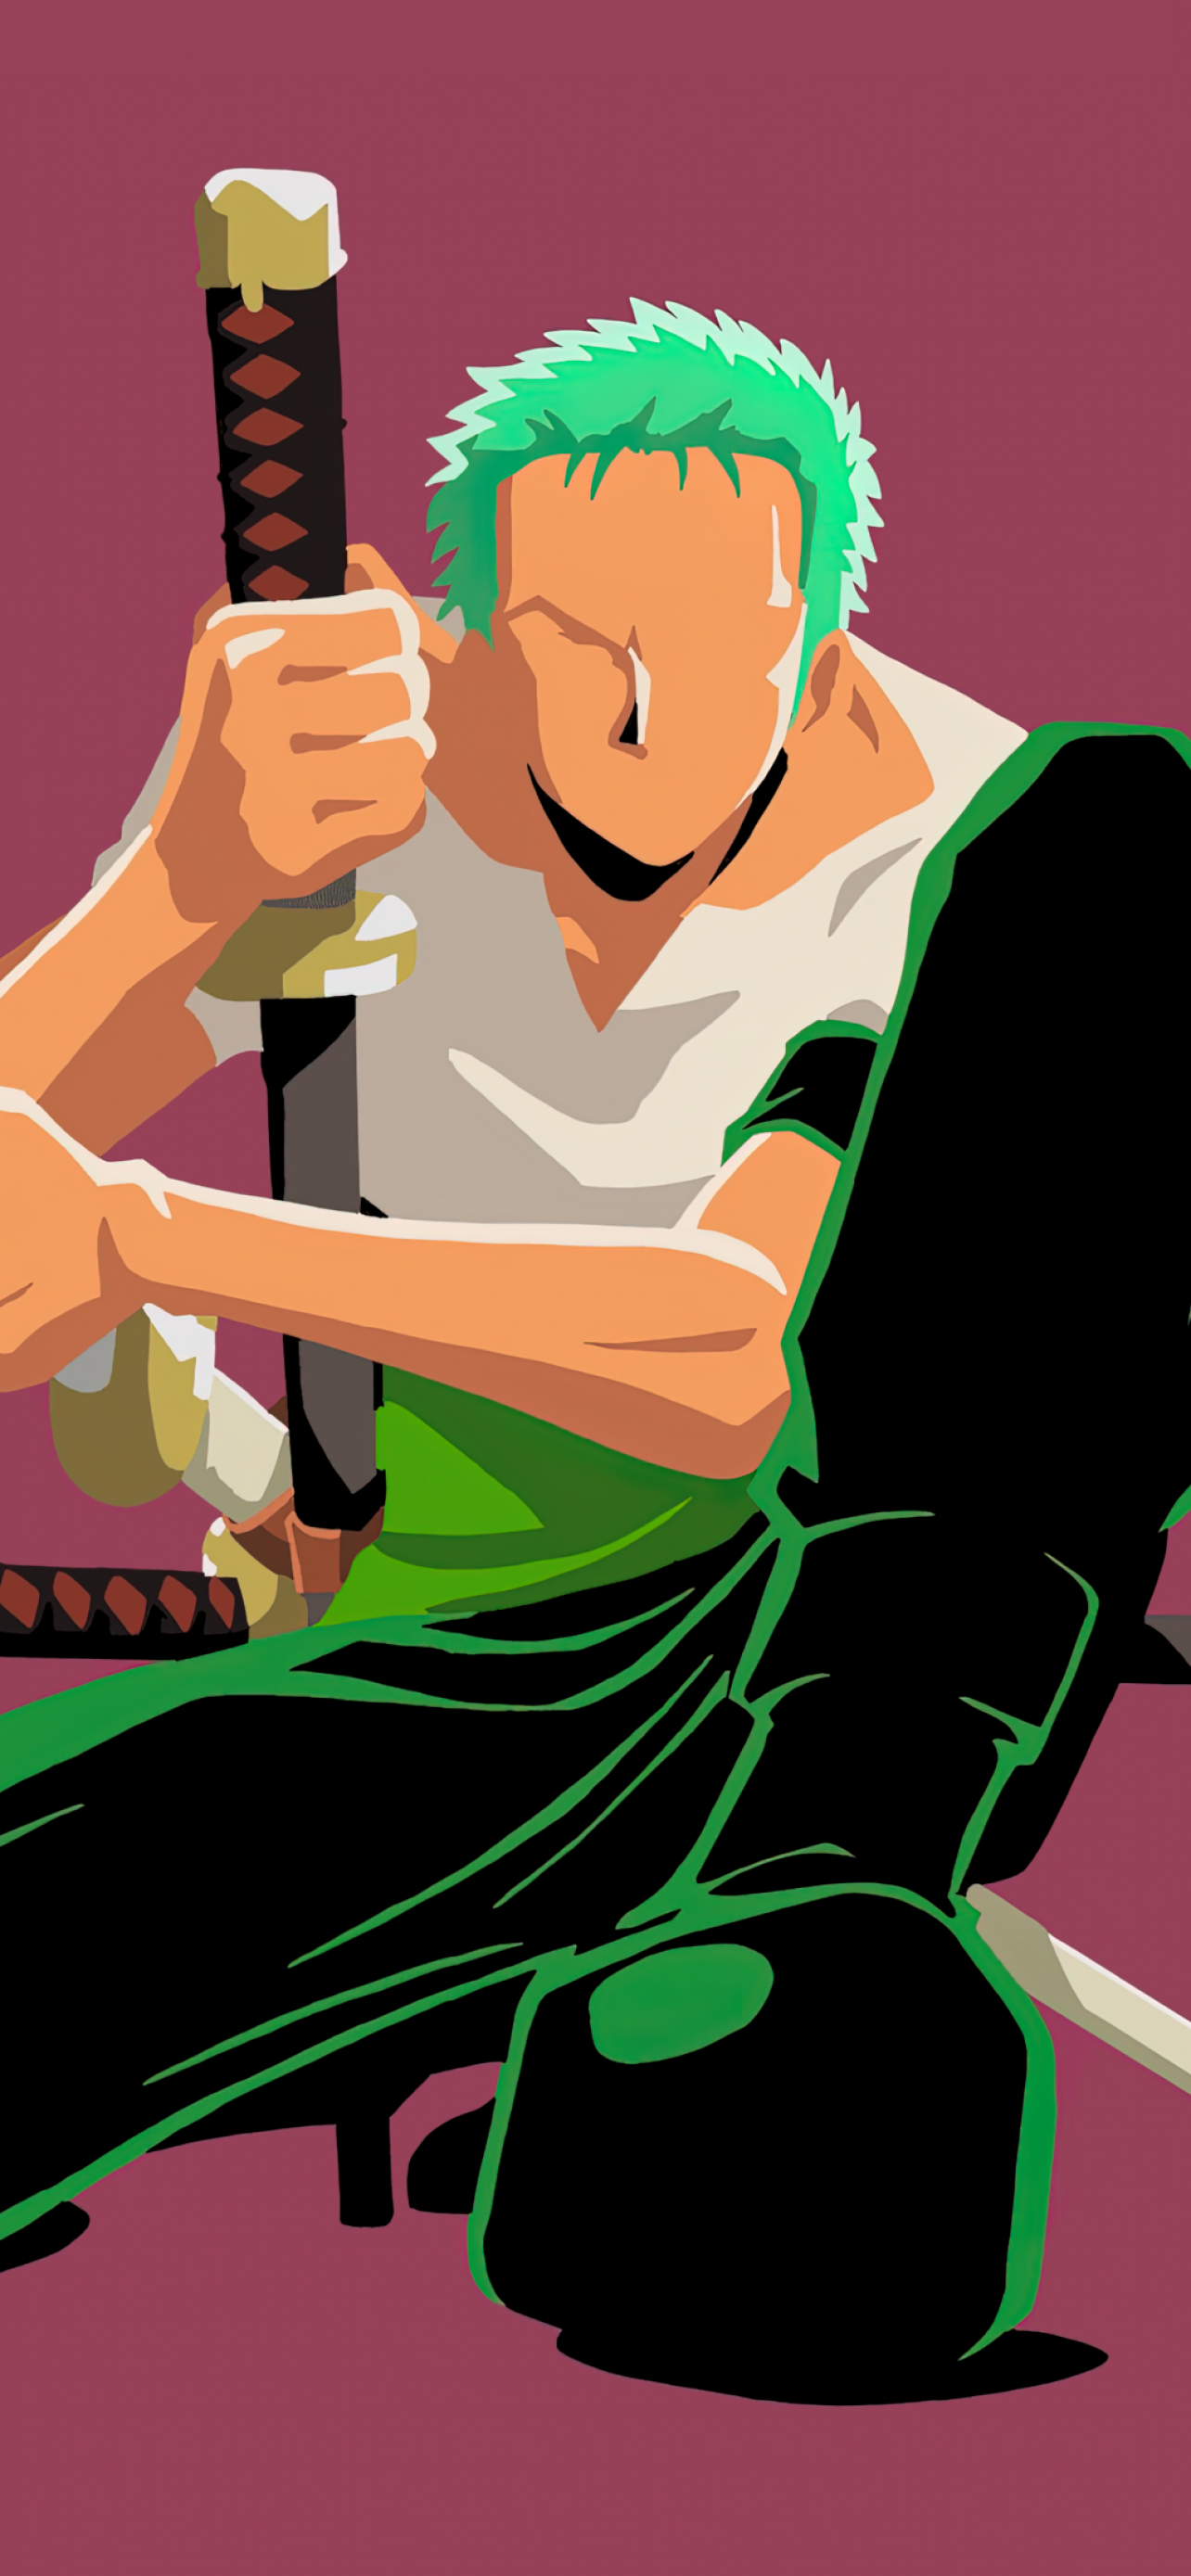 Zoro Art One Piece 4K phone HD Wallpapers Images Backgrounds Photos and Pictures One piece manga Zoro one piece One piece anime